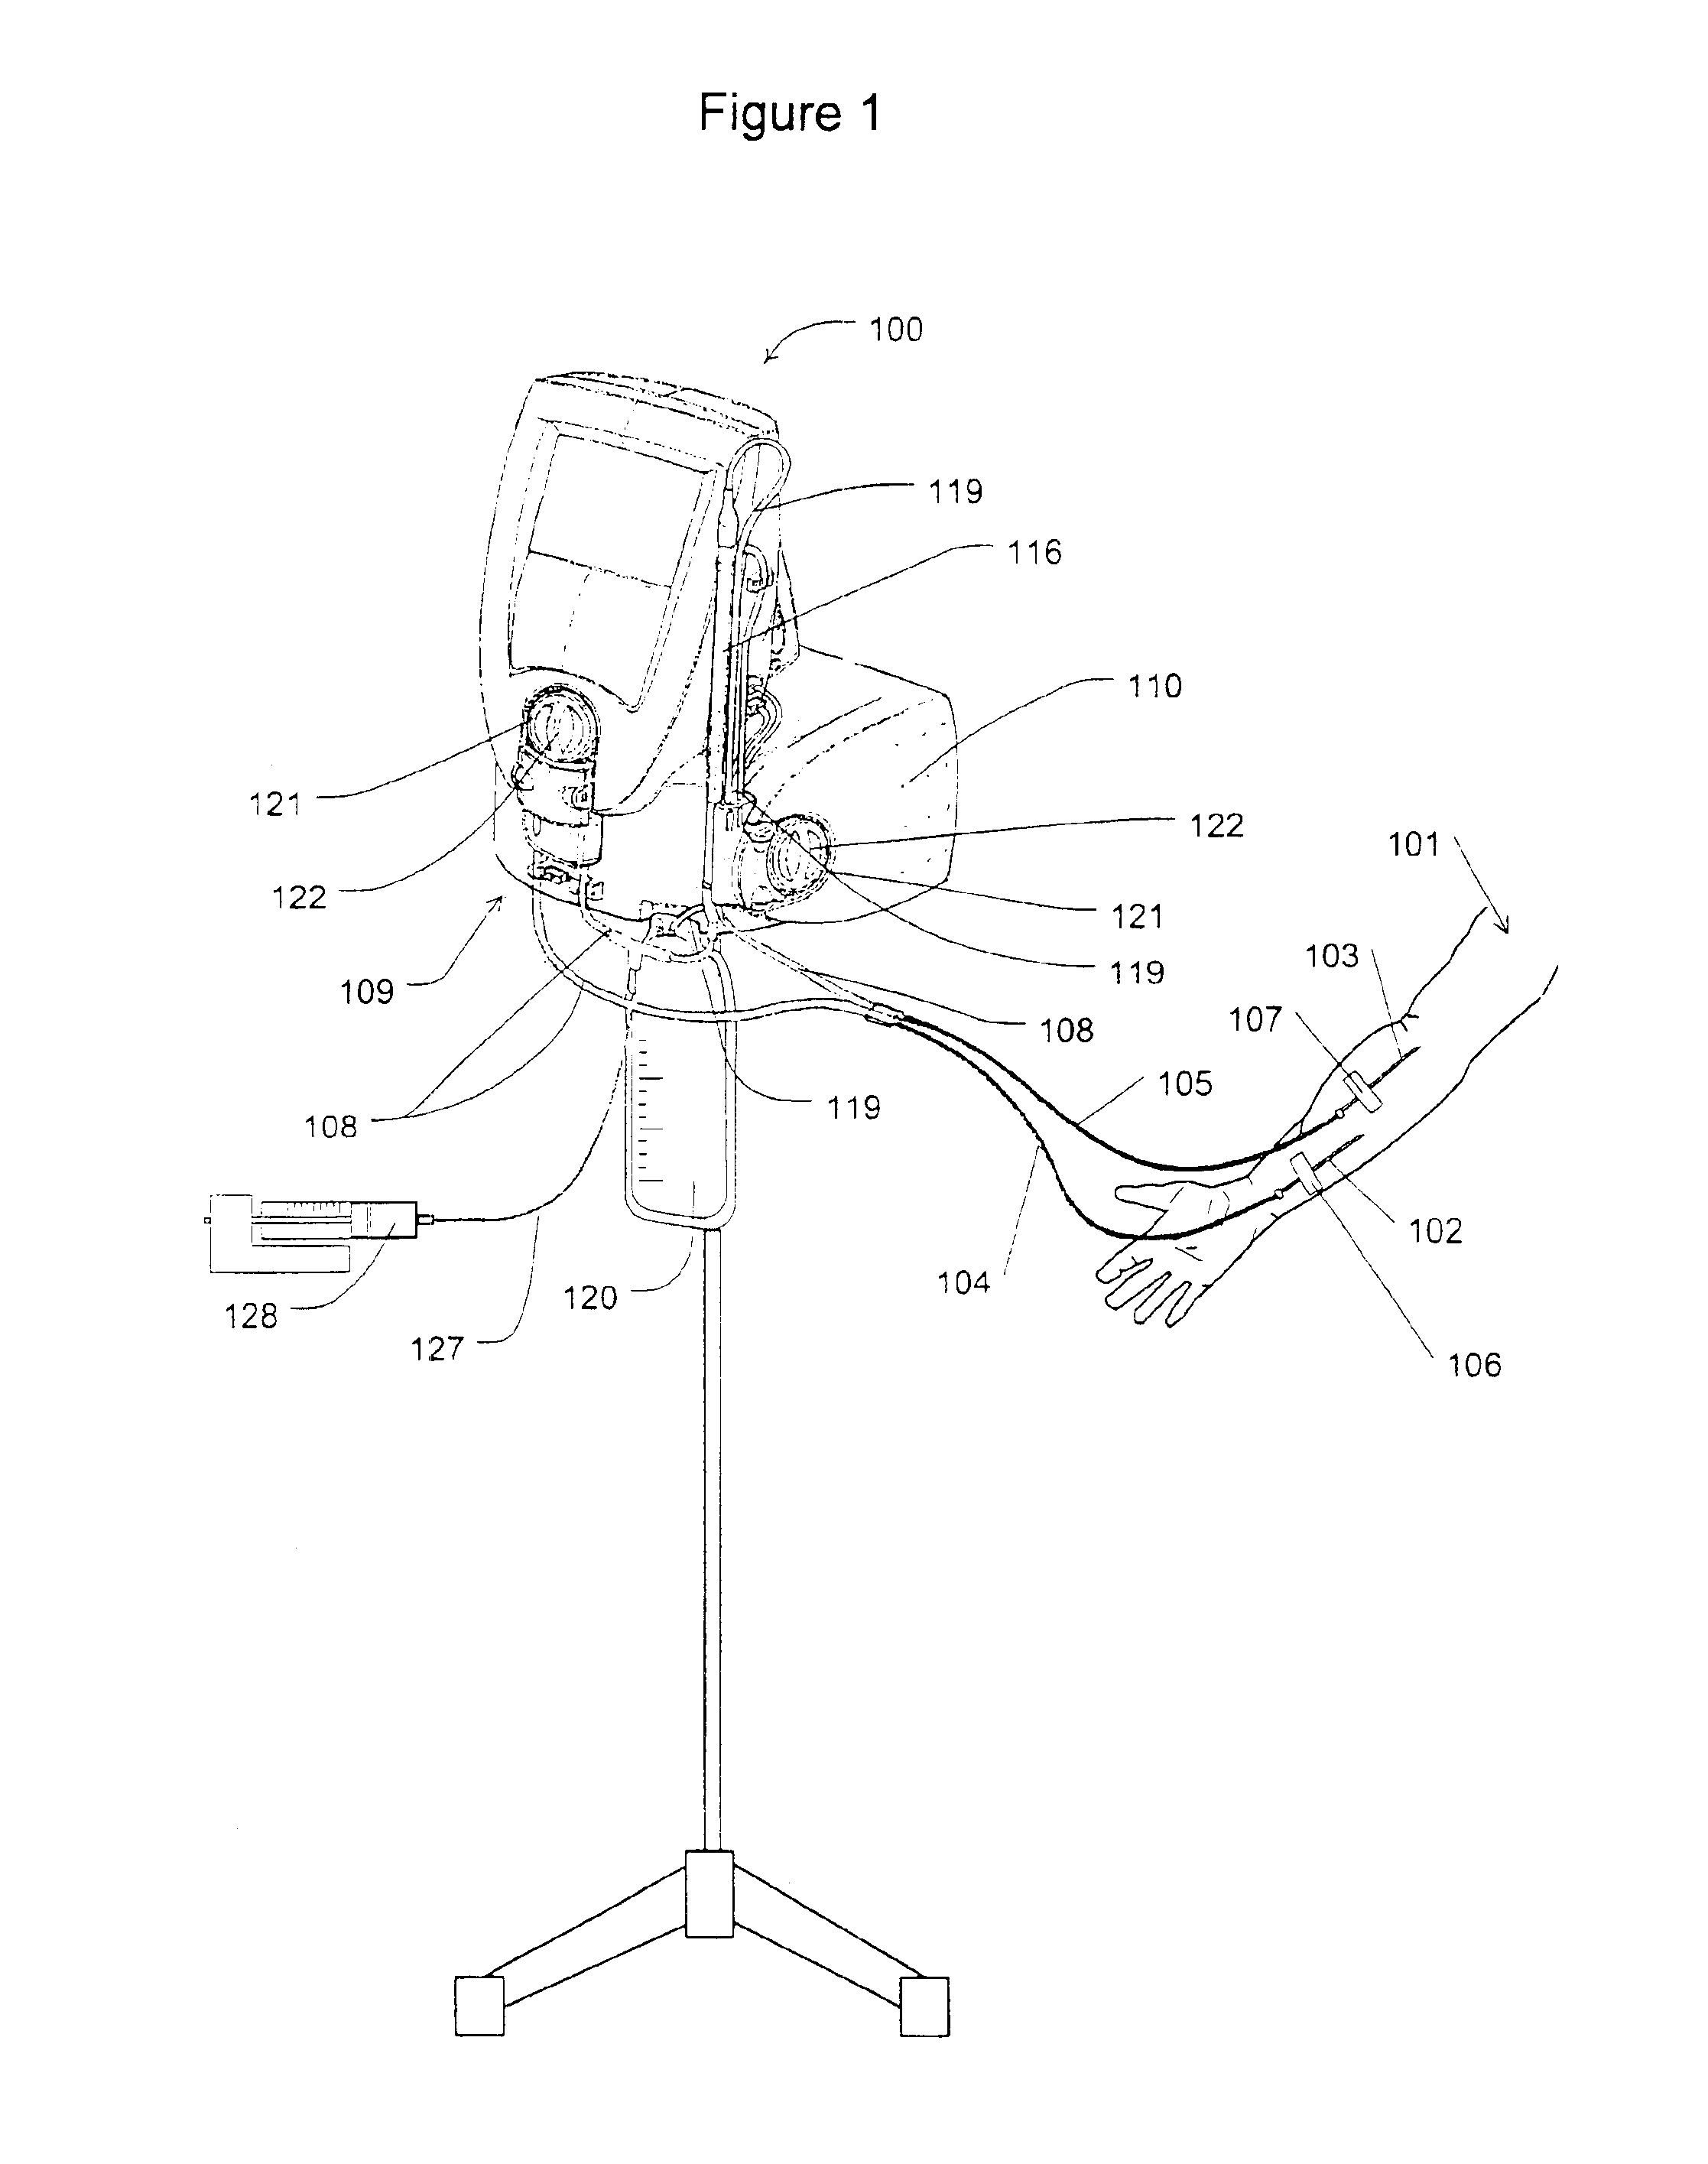 Blood pump having a disposable blood passage cartridge with integrated pressure sensors